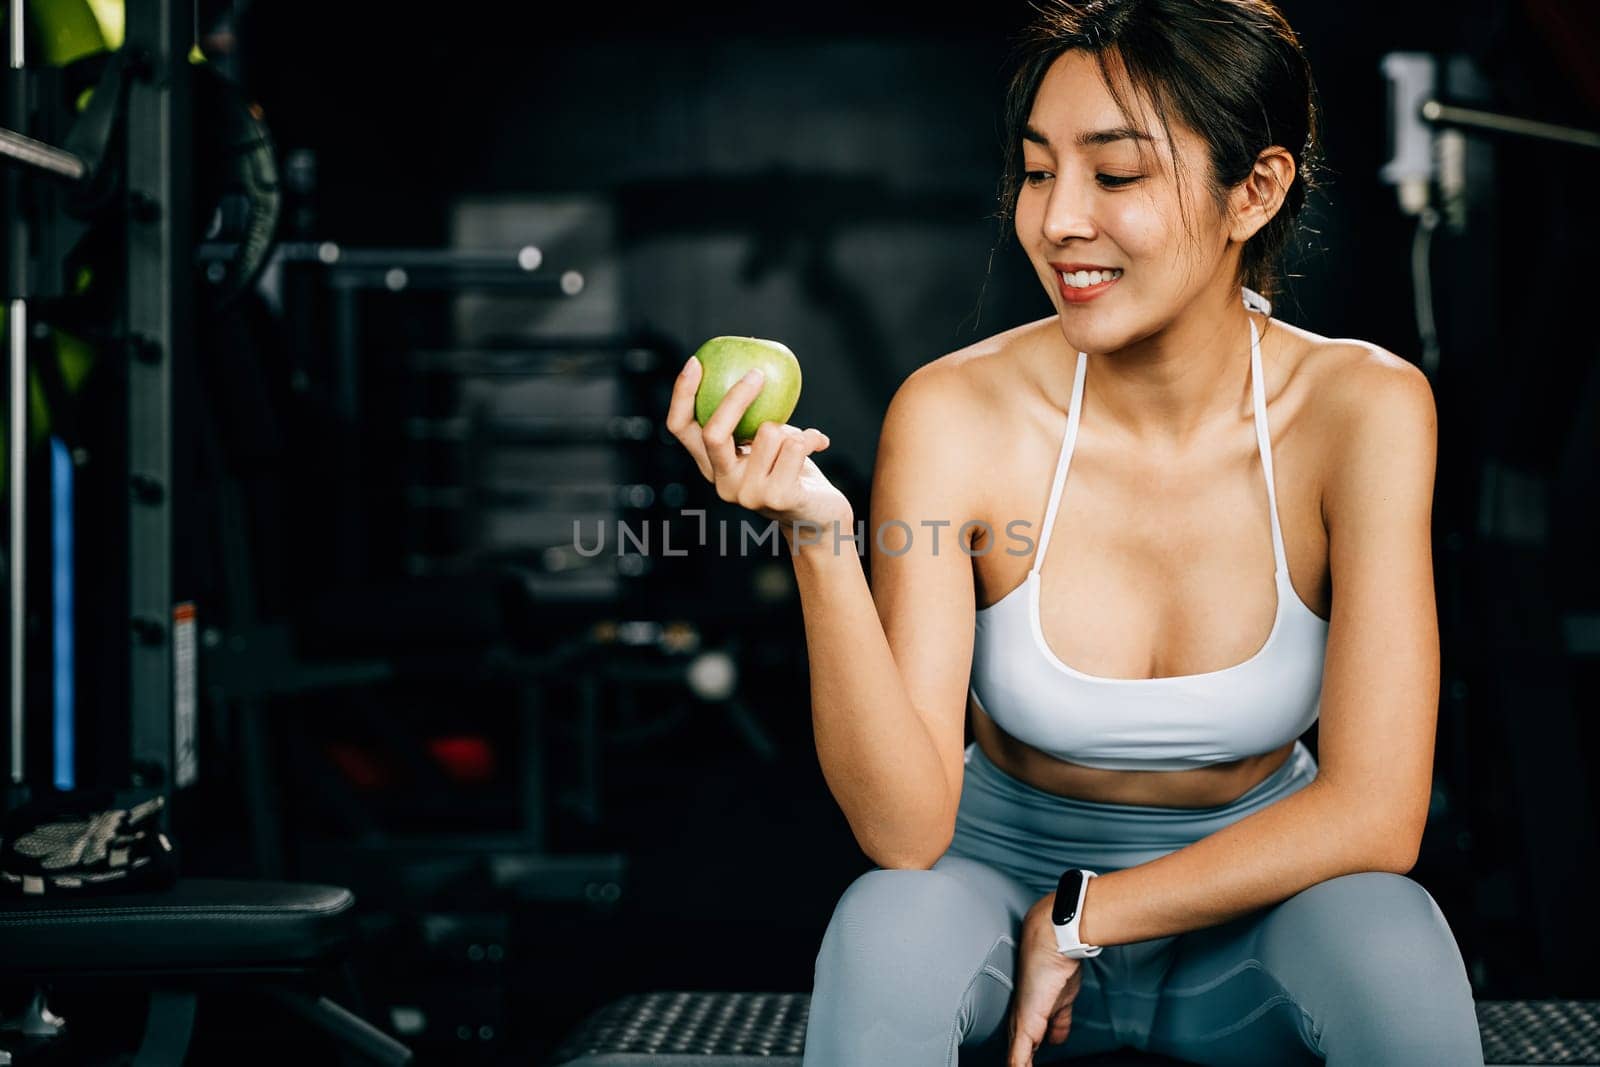 An Asian girl holds a green apple in a fitness gym, emphasizing the importance of healthy food choices for maintaining a slim and sportive physique. Healthy fitness and eating lifestyle concept